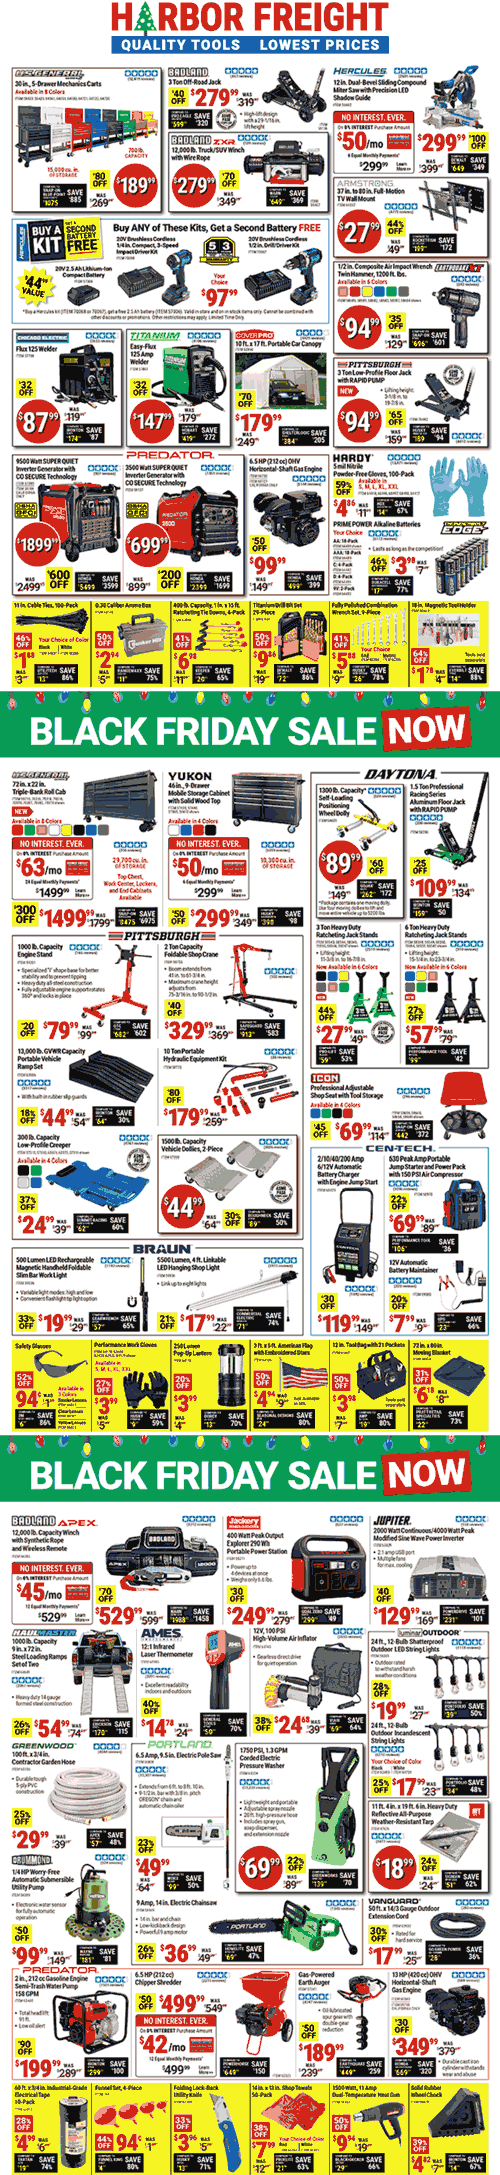 Harbor Freight stores Coupon  Various deals at Harbor Freight Tools #harborfreight 